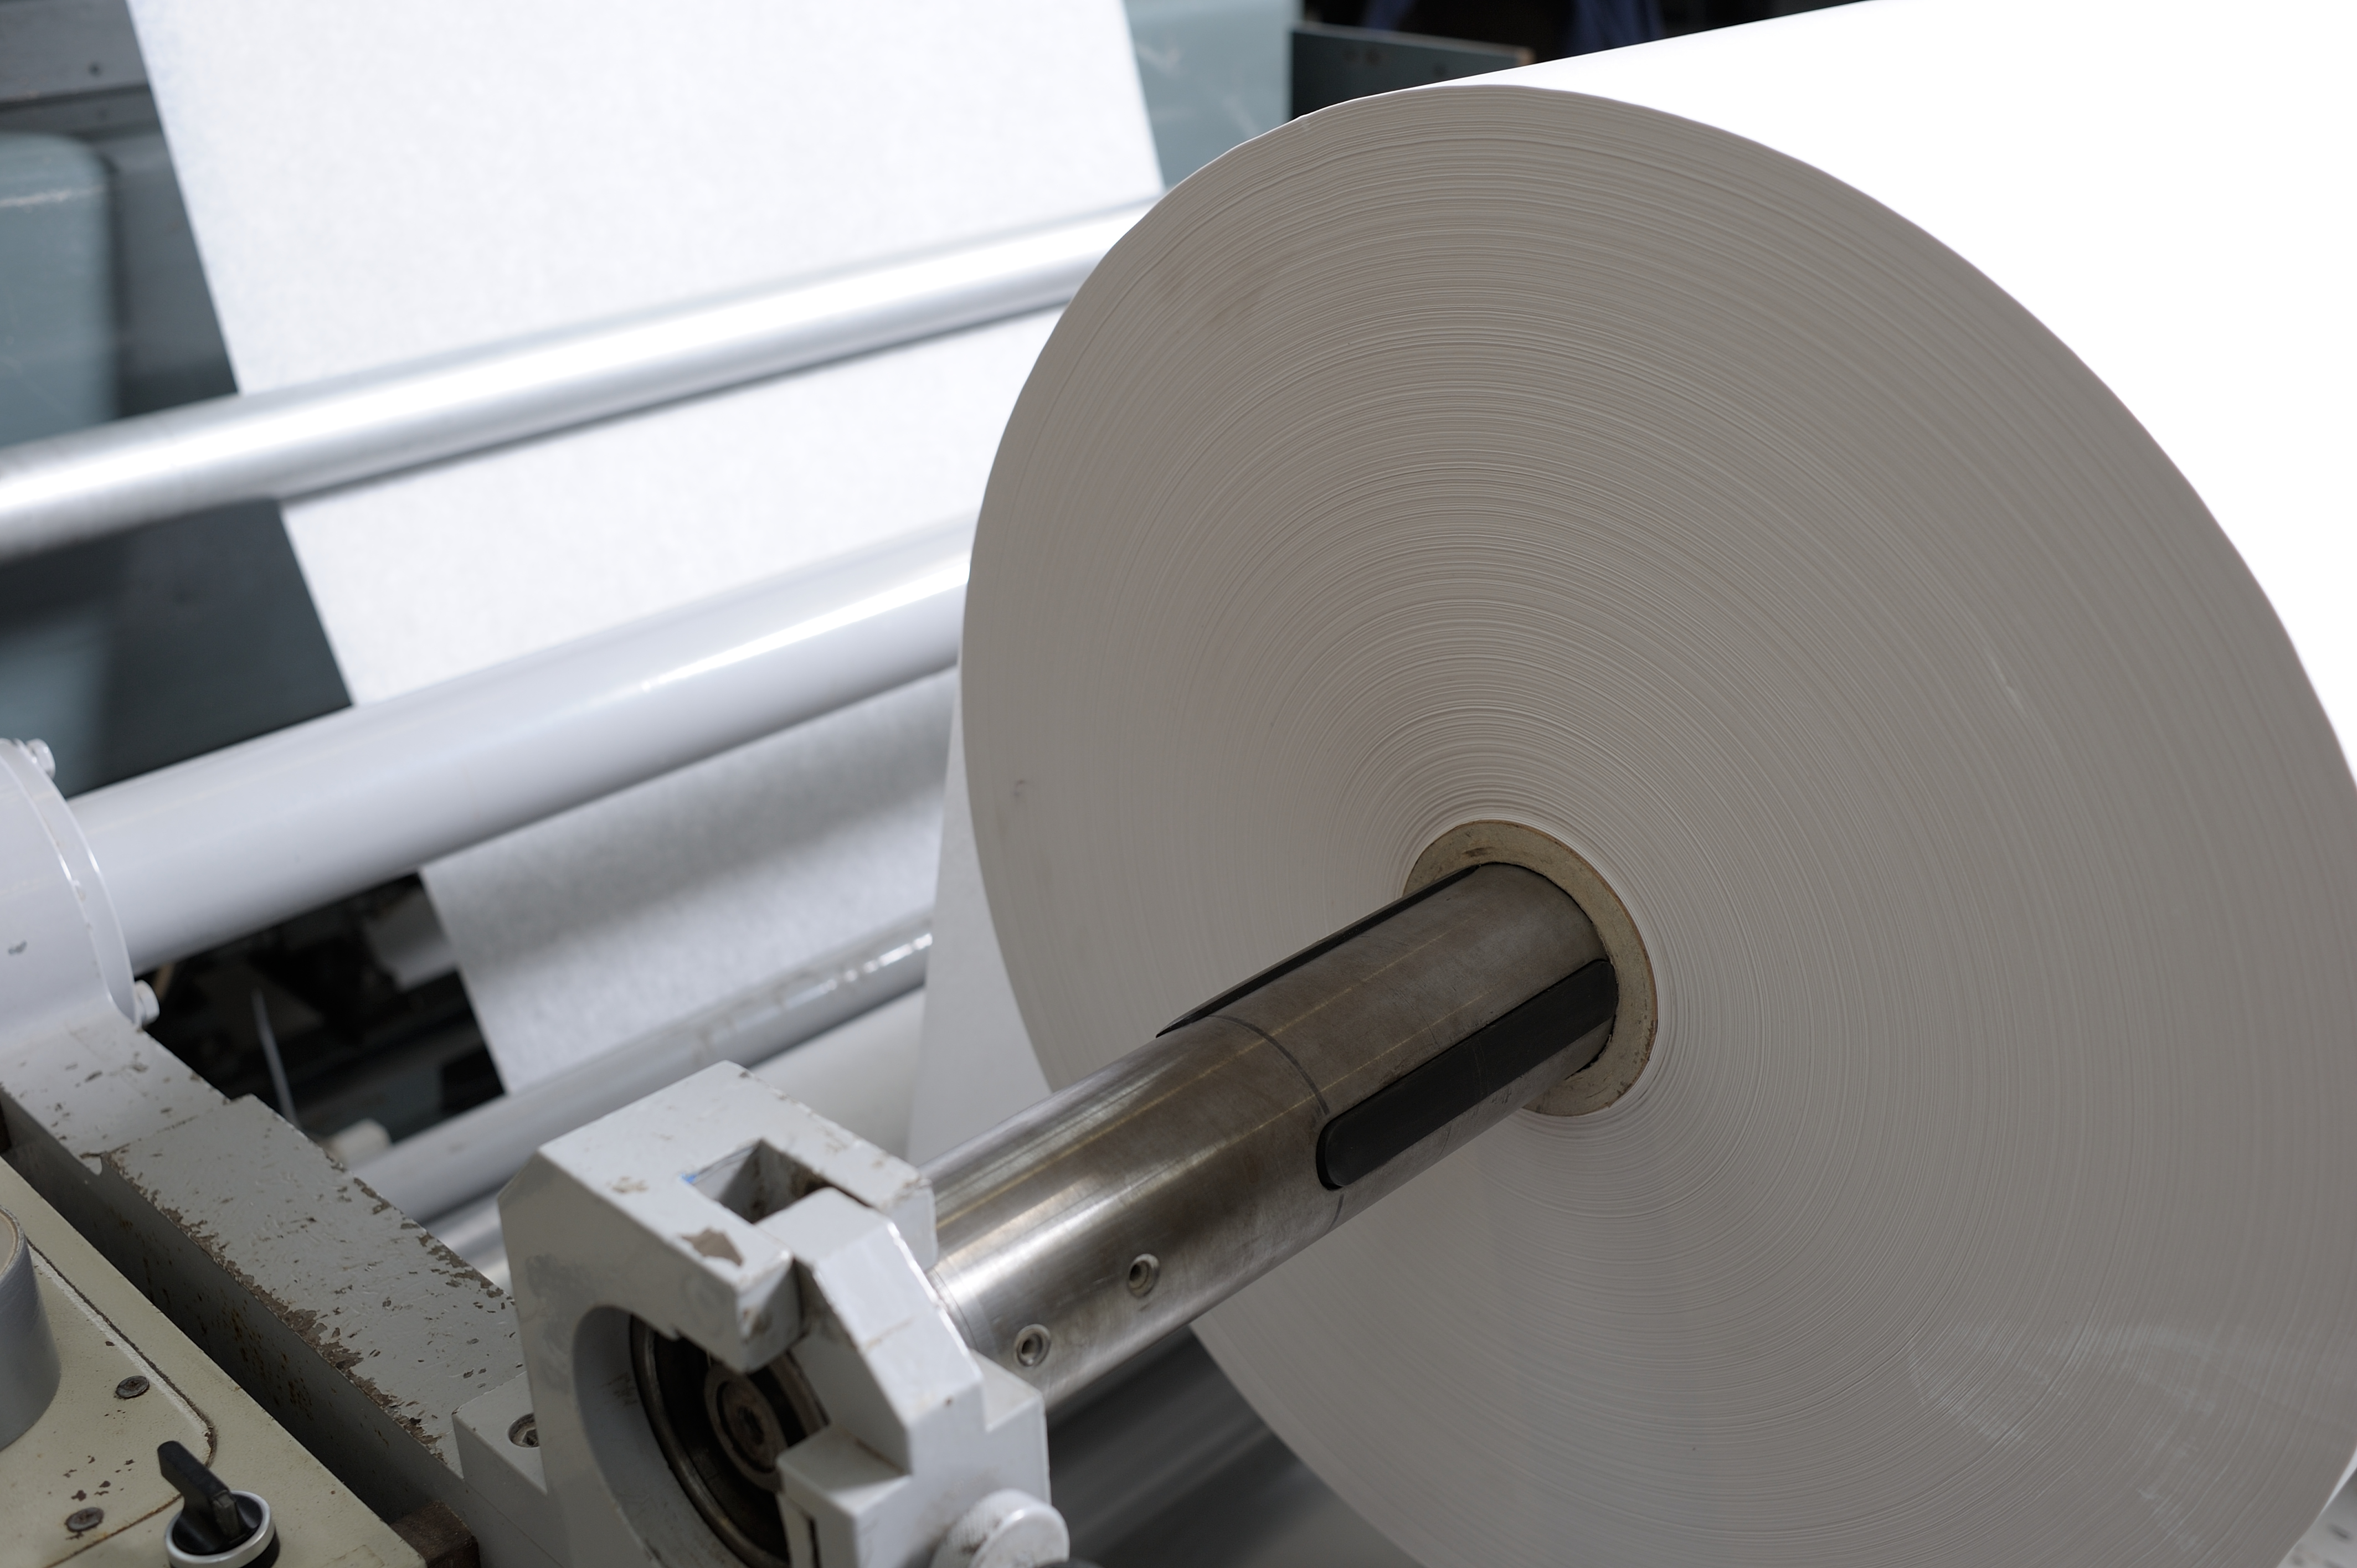 Rolls Of Greaseproof Paper Used To Process Dairy Products For Retailers In The UK